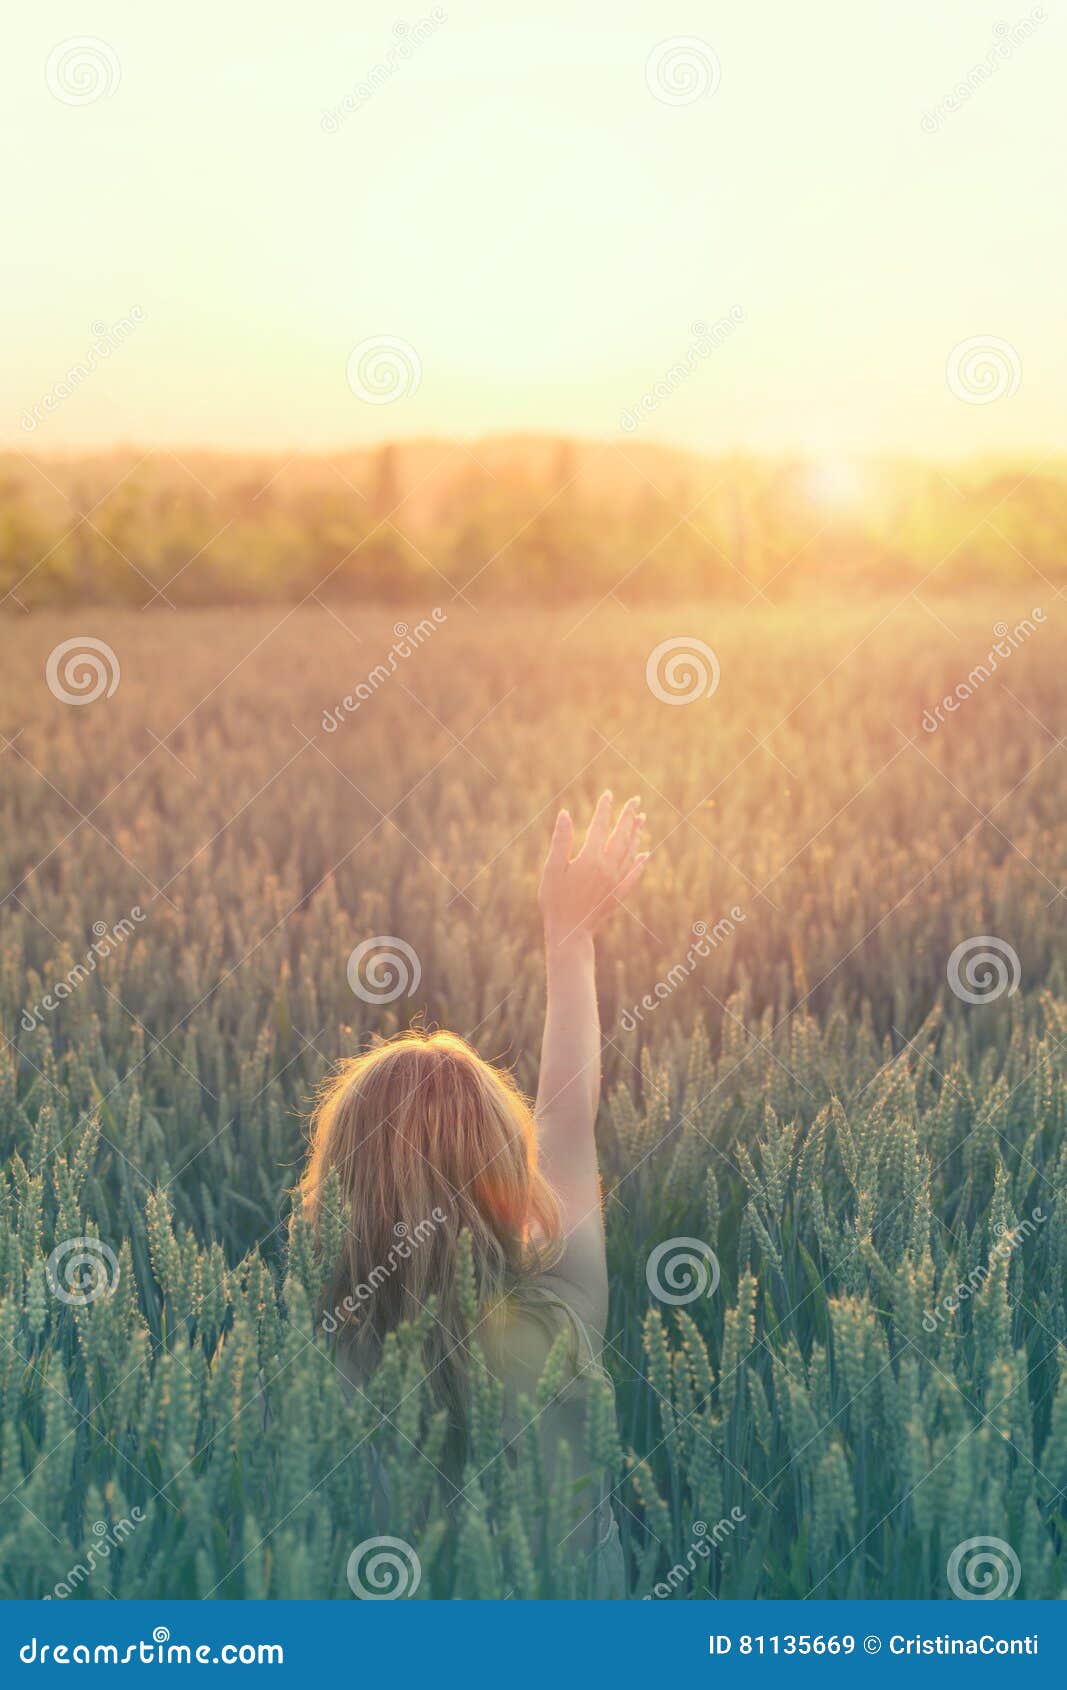 hipster woman touches the sun with her hand in the middle of the nature